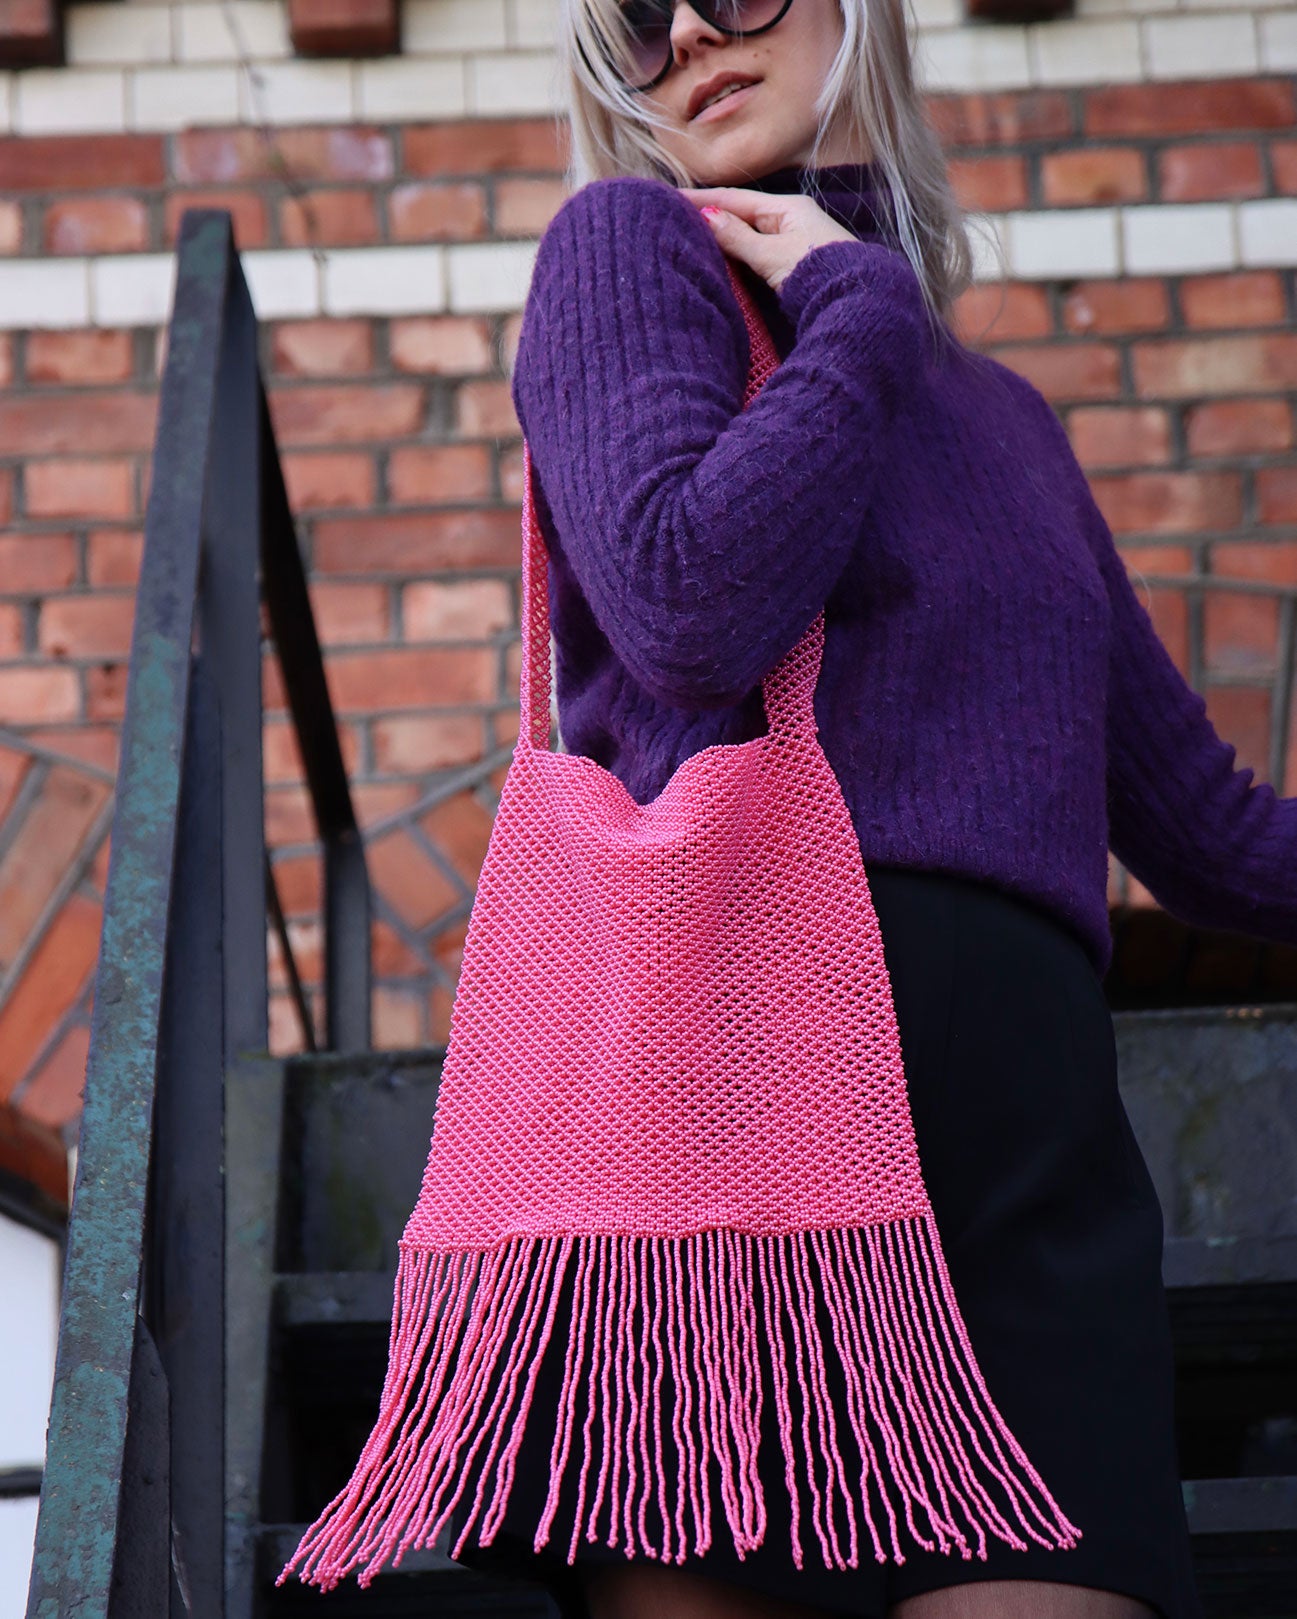 the Marmaclub Crossover Fringe Hot Pink on model in purple sweather and black skirt in a steep stair ers in front of a red wall